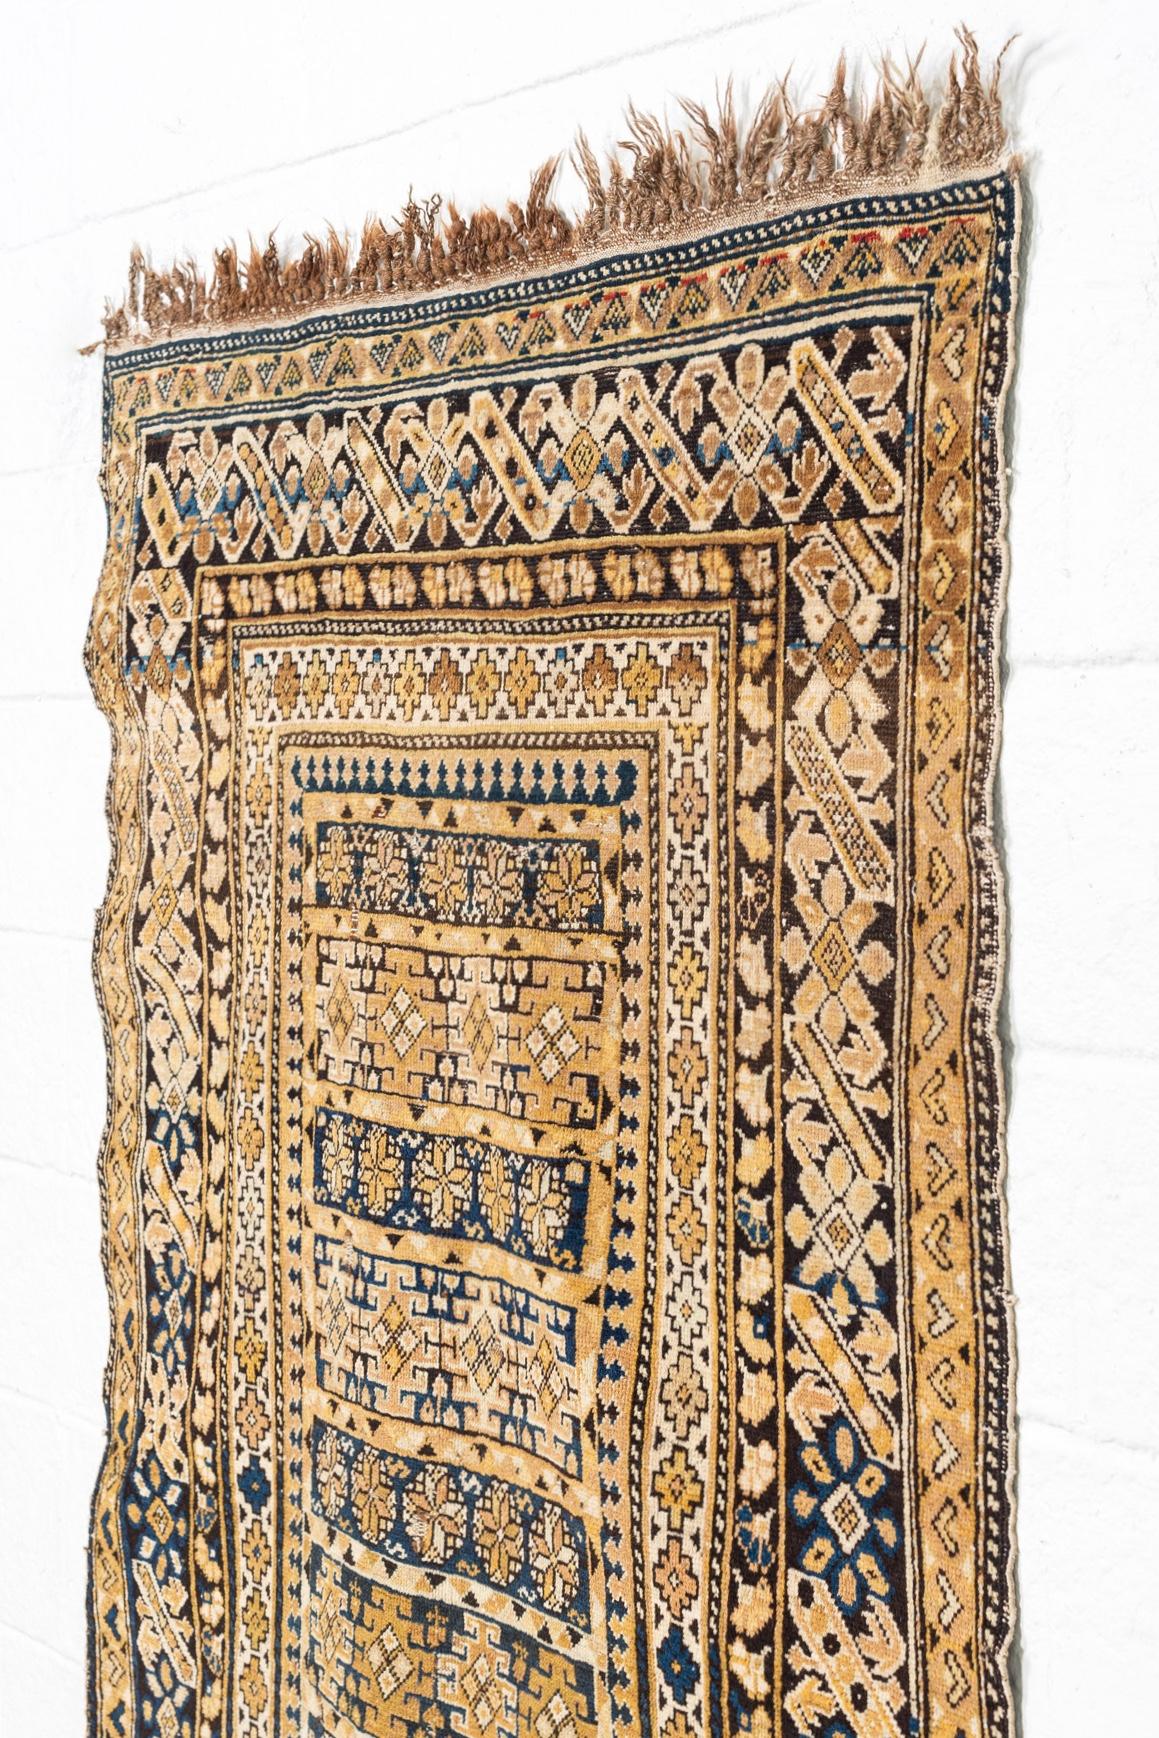 This exquisite antique handwoven Kuba rug circa late 1800s is from the Caucasus region (present-day Azerbaijan) and features a stunningly rich and intricate geometric pattern infused with tribal symbolism with beautiful depth of color in shades of